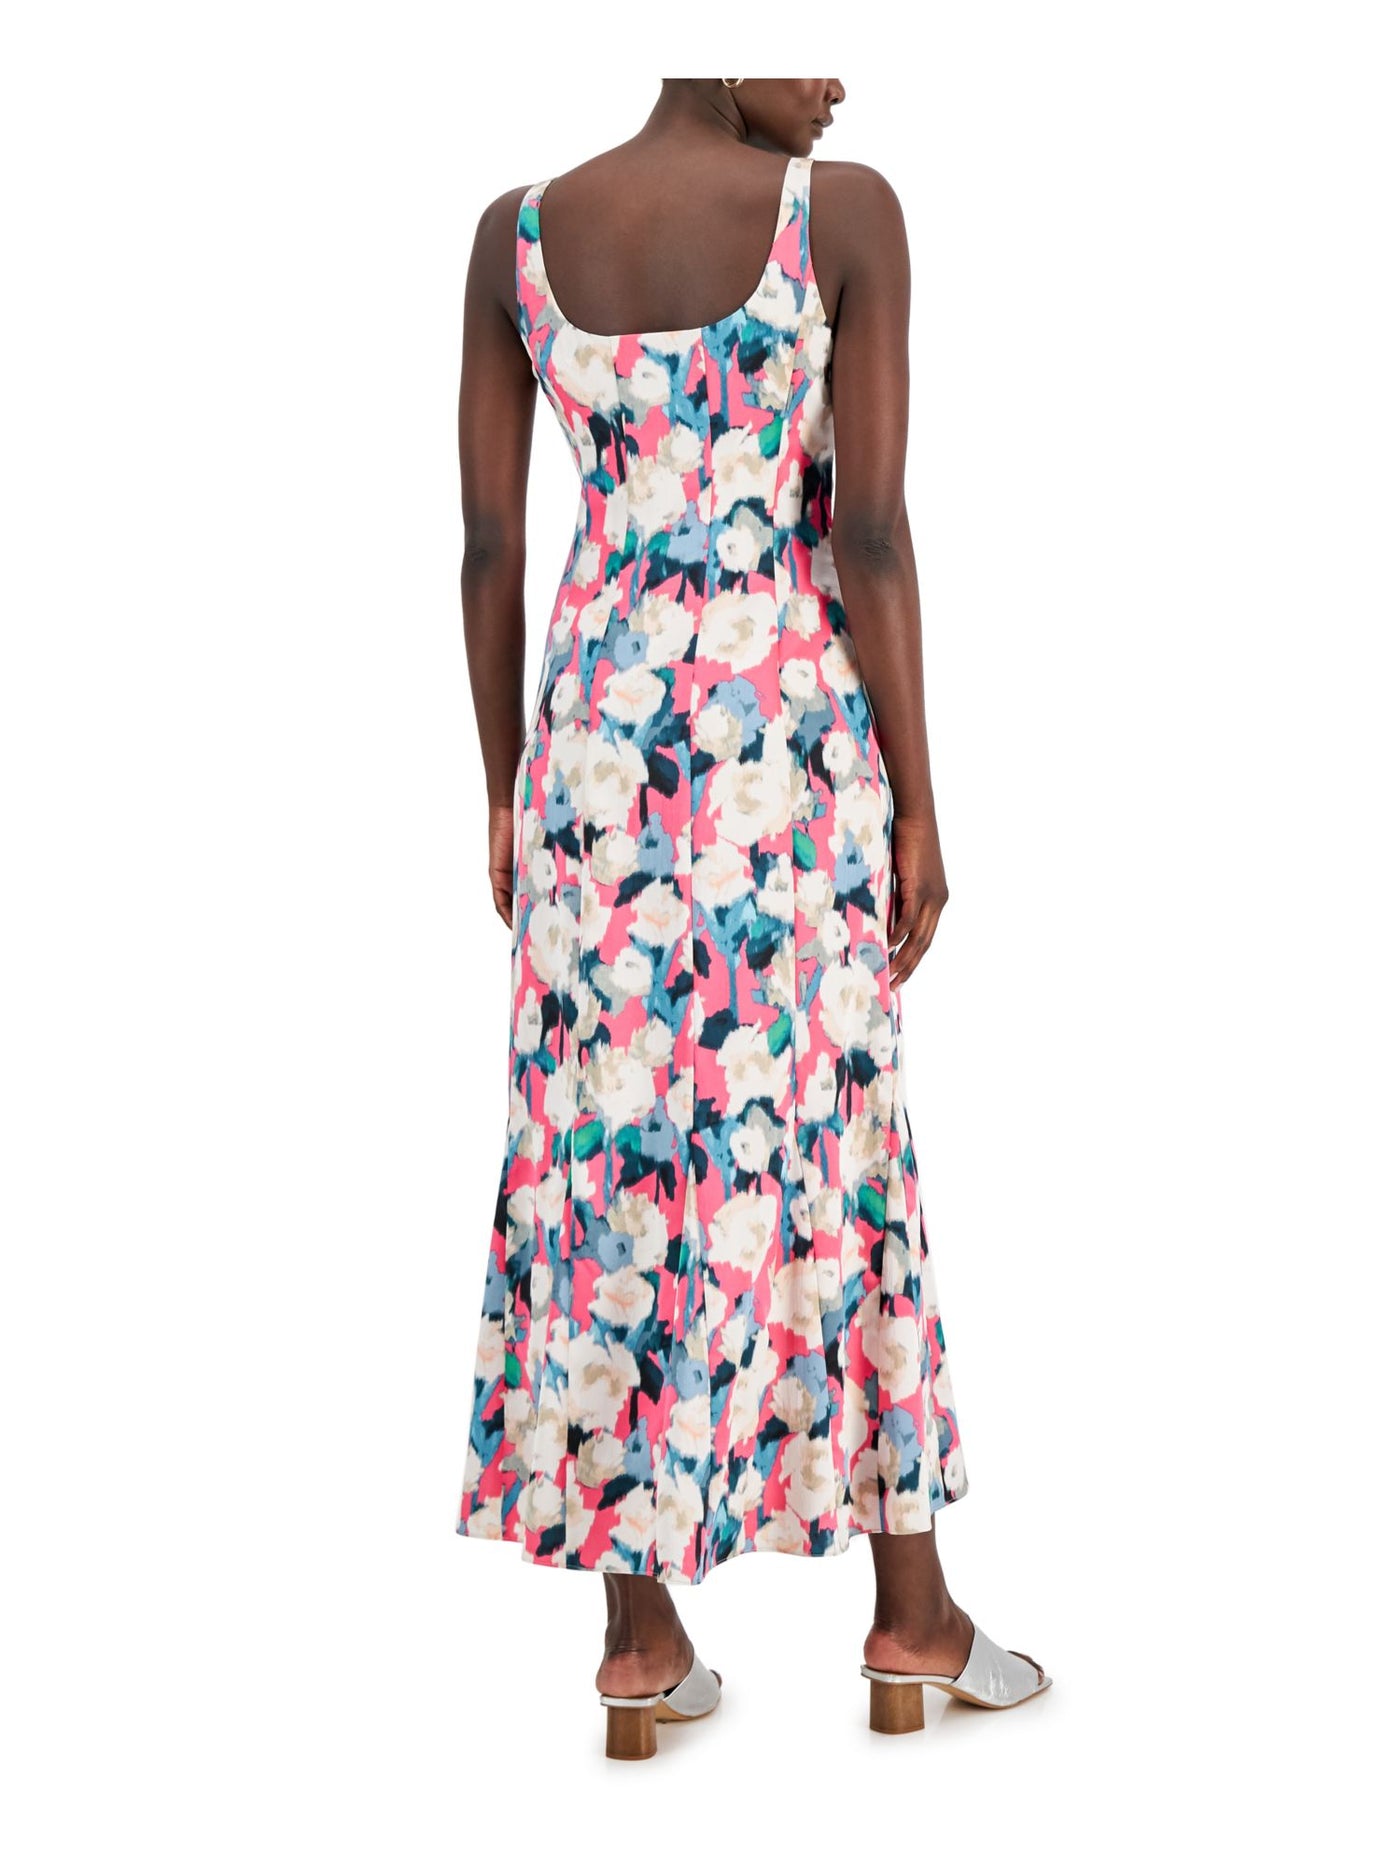 DONNA KARAN NEW YORK Womens Pink Zippered Lined Scoop Back Seamed Pullover Printed Sleeveless Scoop Neck Maxi Fit + Flare Dress 6